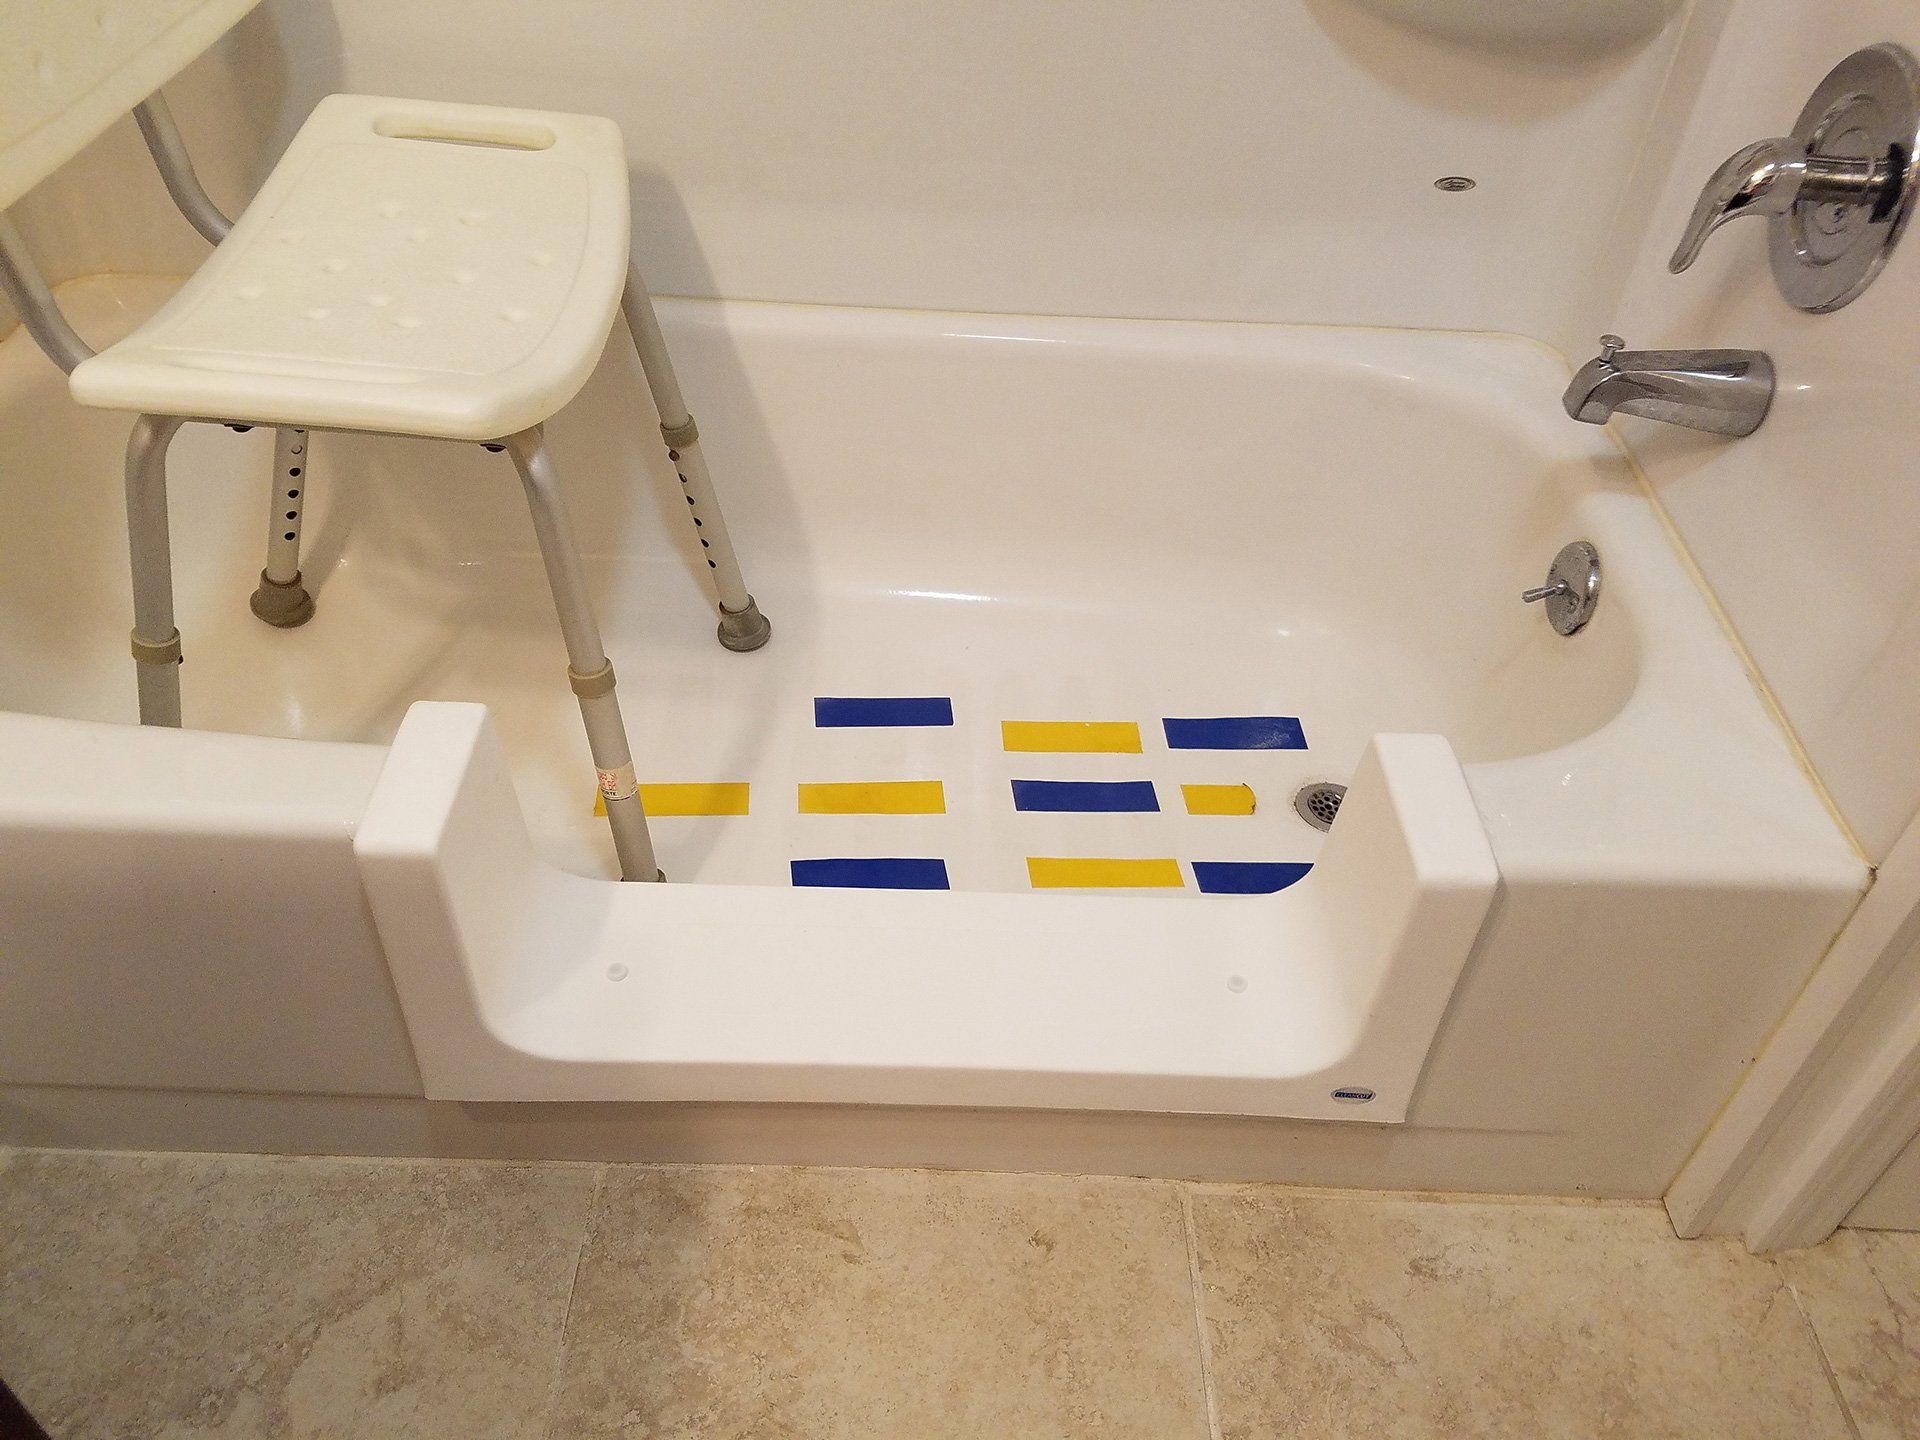 Bath tube with Safety Chair